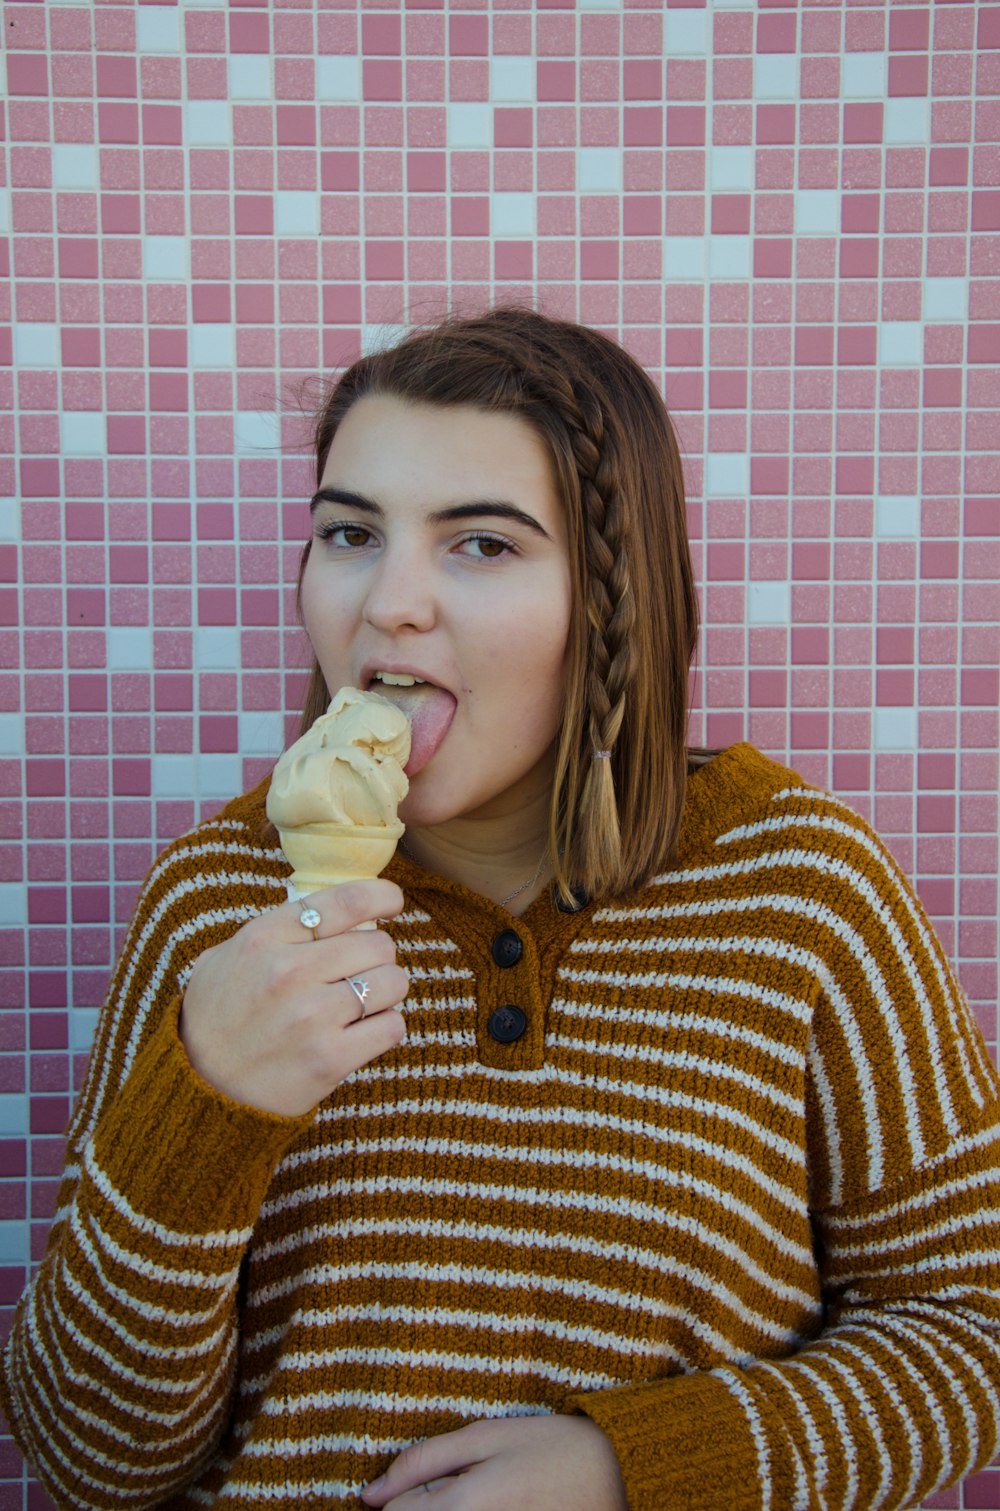 woman wearing brown and white floral sweater eating ice cream